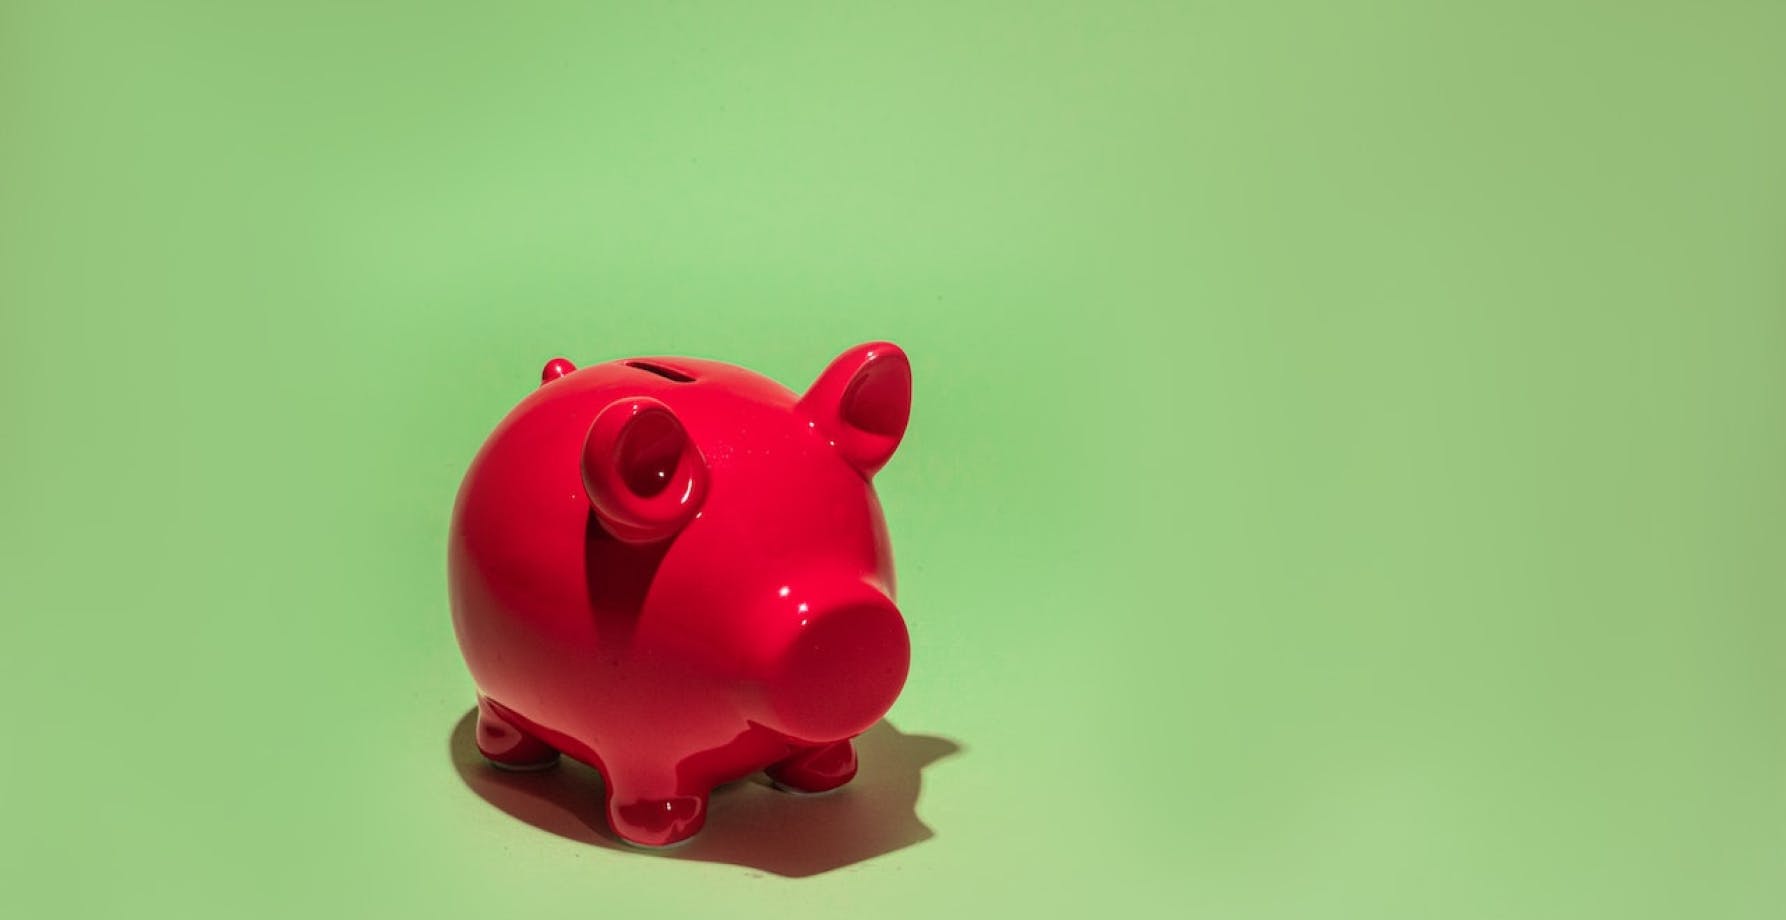 Red piggy bank on a green background